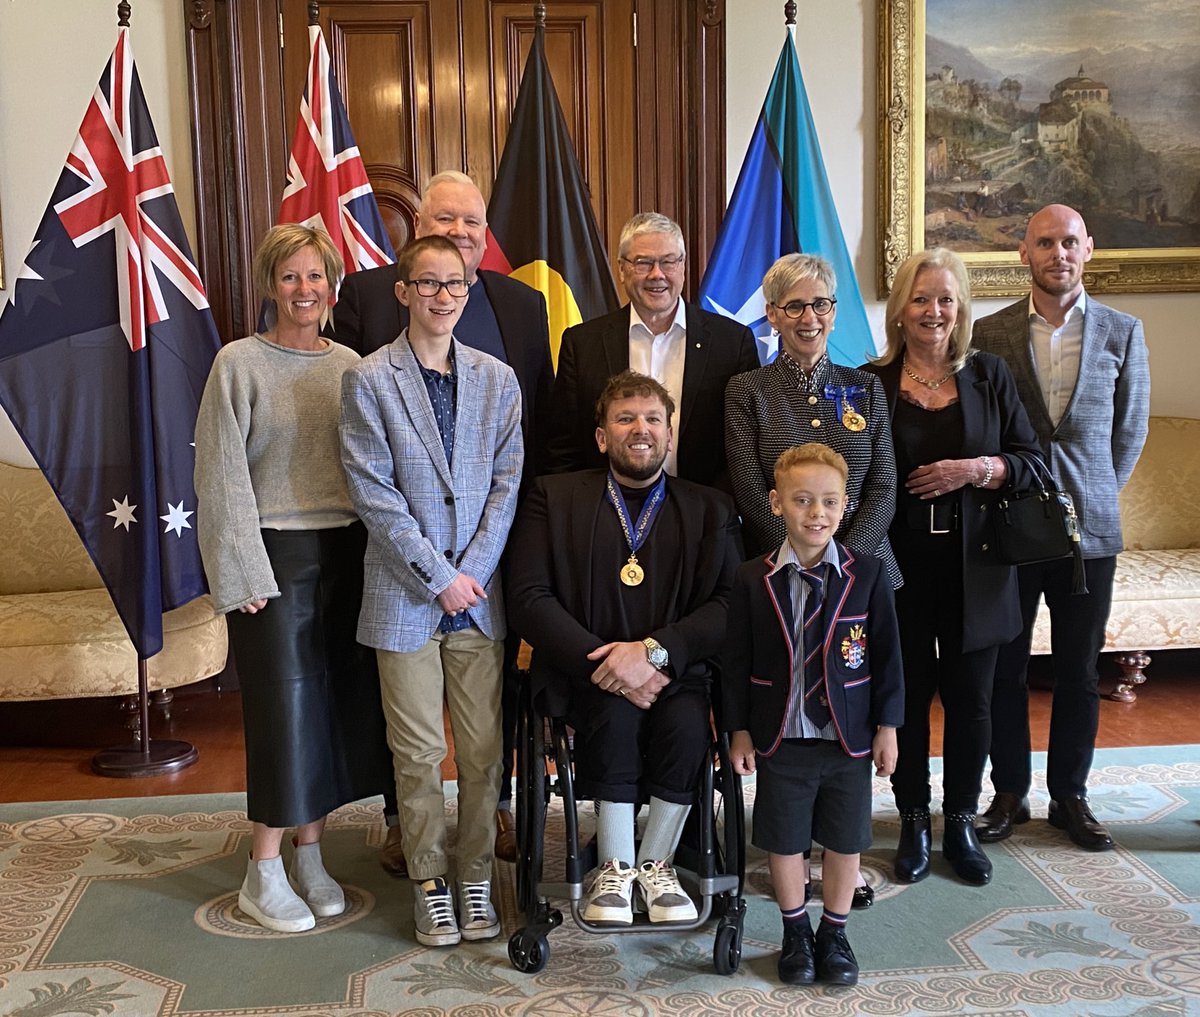 This morning the Governor invested Australian of the Year @DylanAlcott AO as an Officer of the Order of Australia in recognition of his service to Paralympic sport, contributions to community organisations and as role model for people living with disability. @TennisAustralia